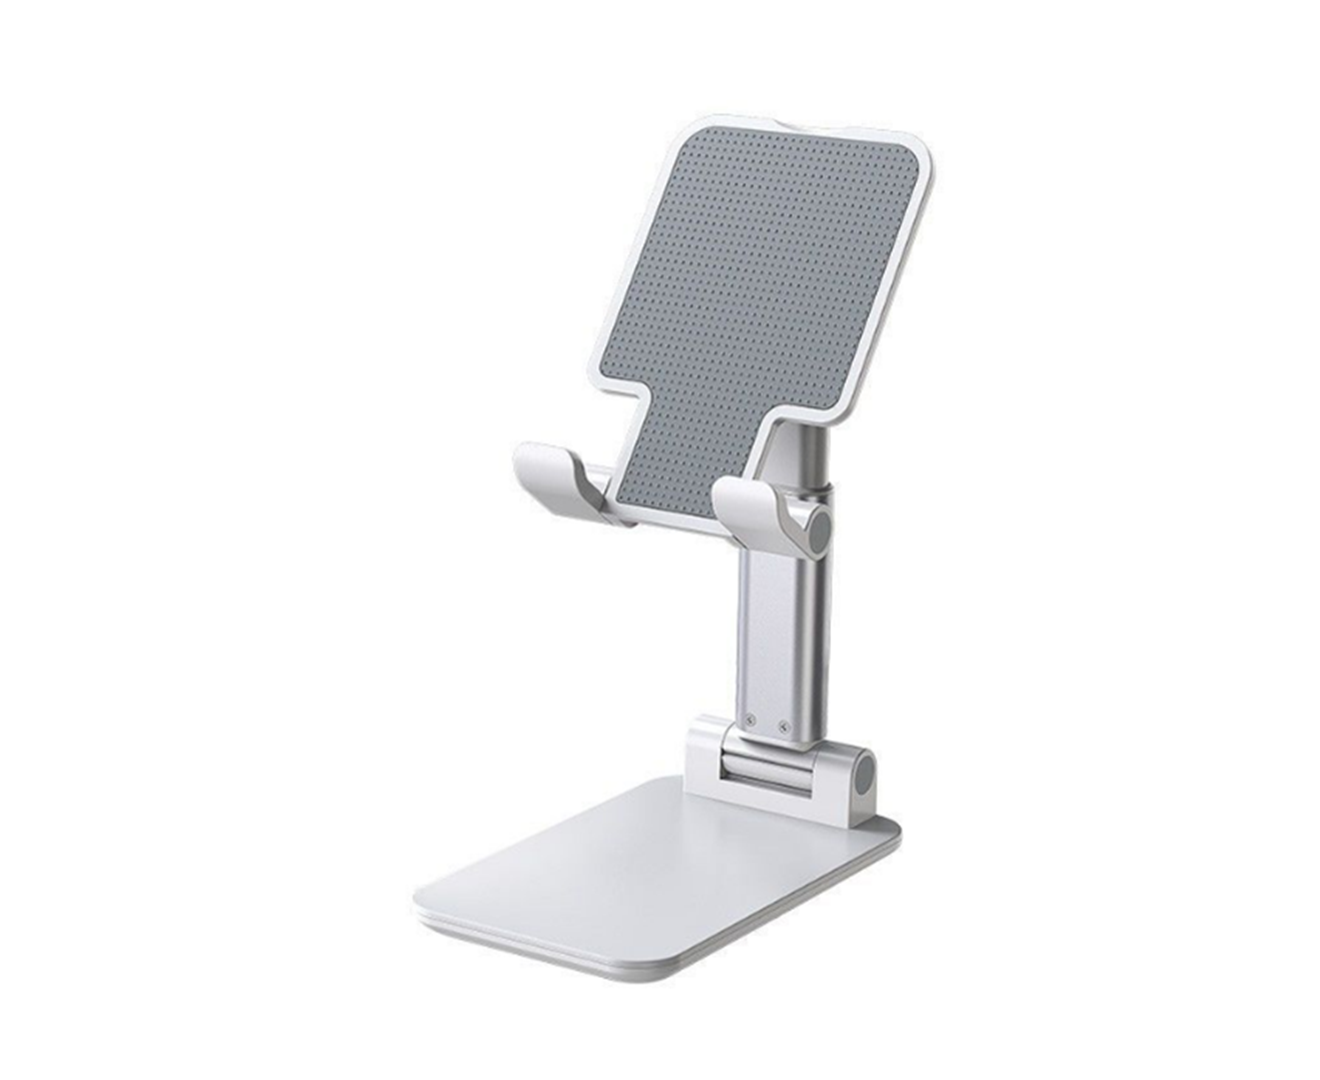 12.9 Inch Mobile Phone Tablet Stand Folding Mobile Phone Stand Portable Retractable Desktop Stand